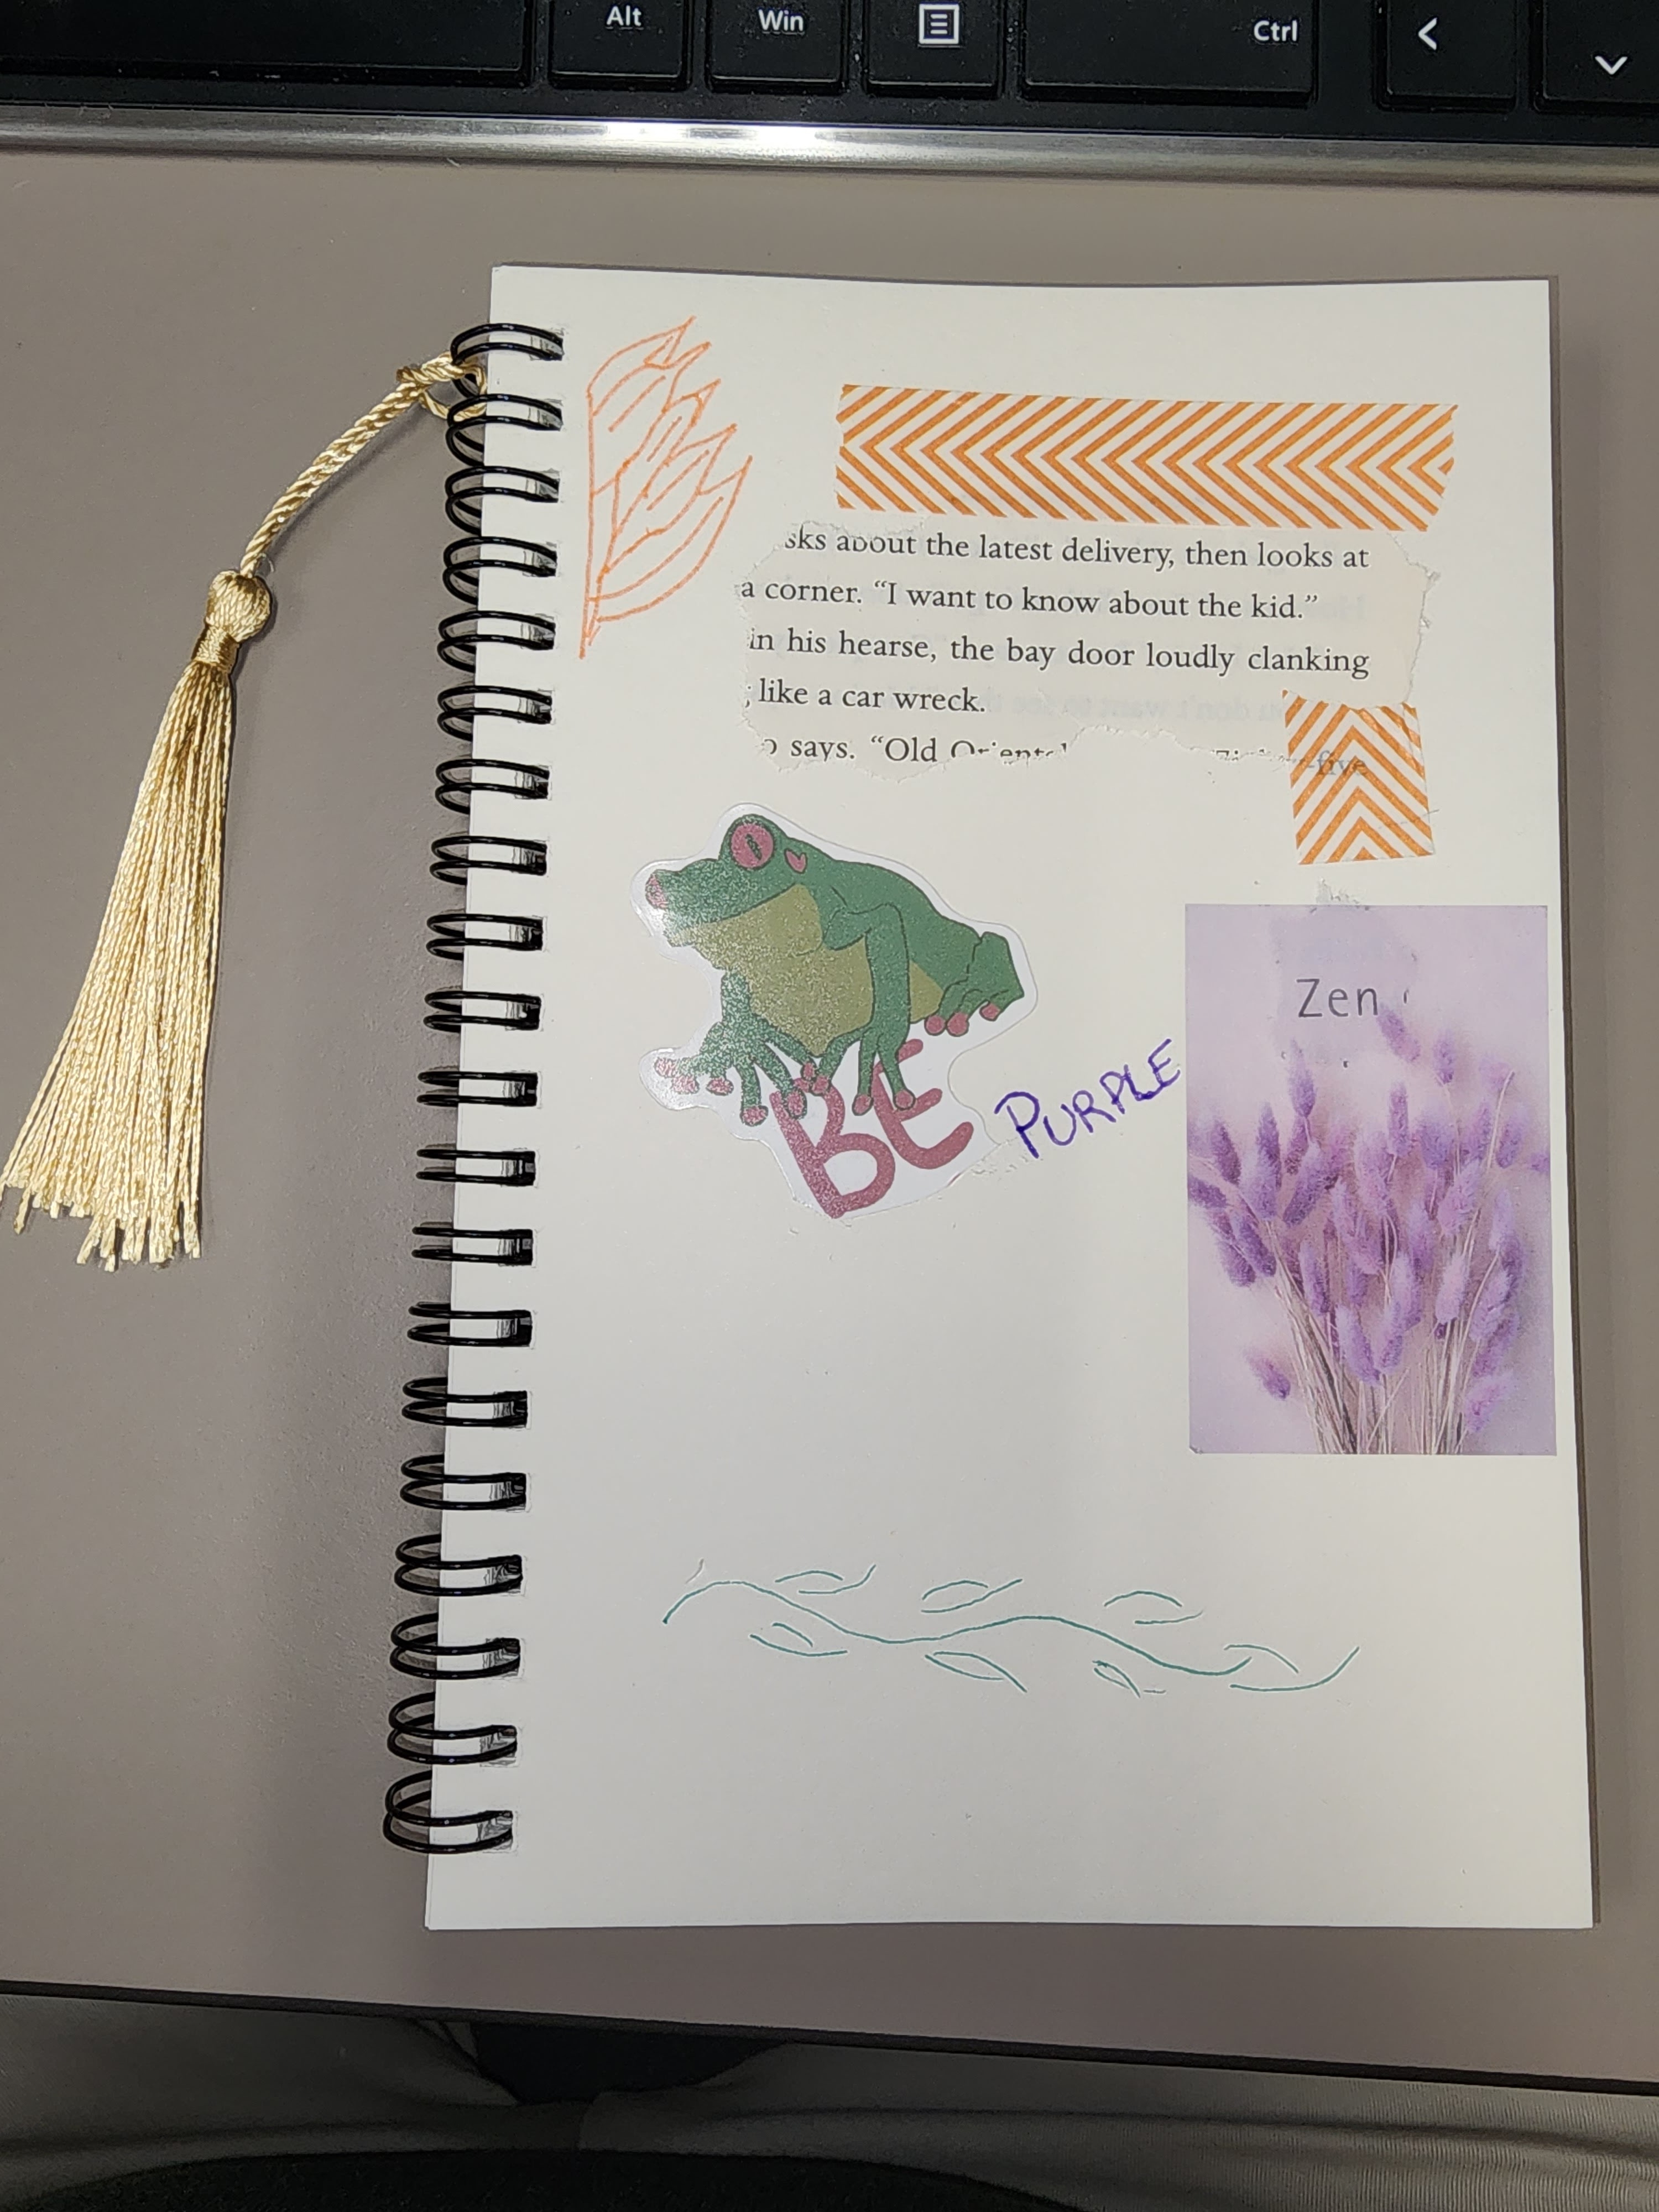 an example of a junk journal, various images and book quotes are taped to the inside in an almost random pattern.